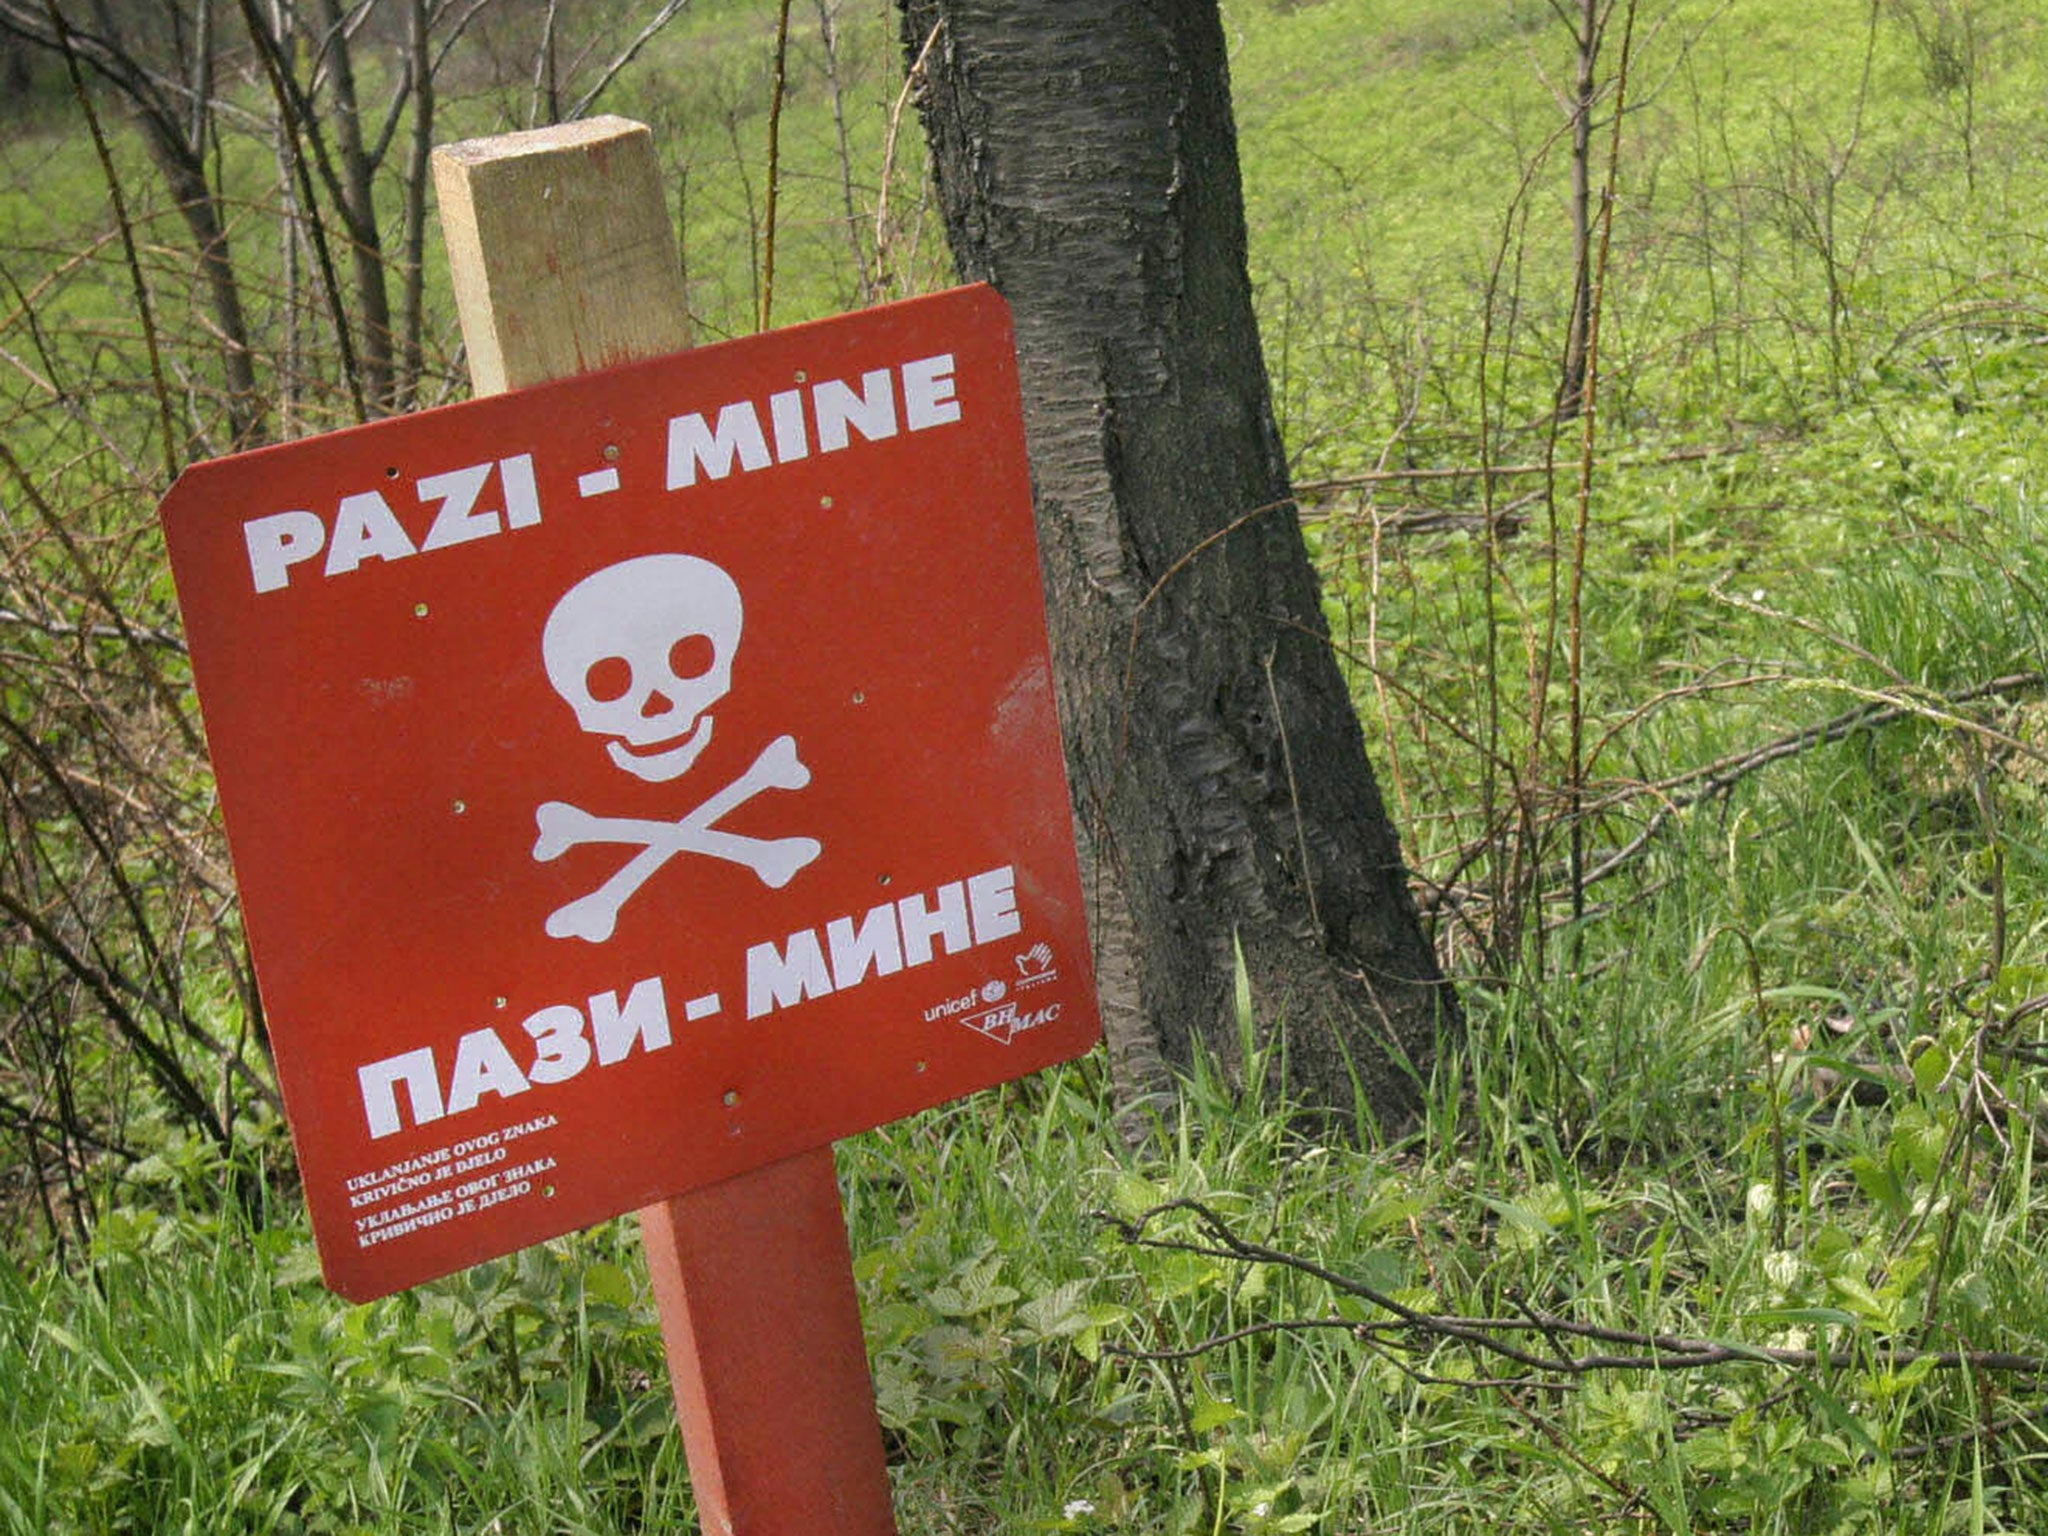 File: A warning sign in front of a minefield in the Bosnian town of Modrica, near the Croatian border